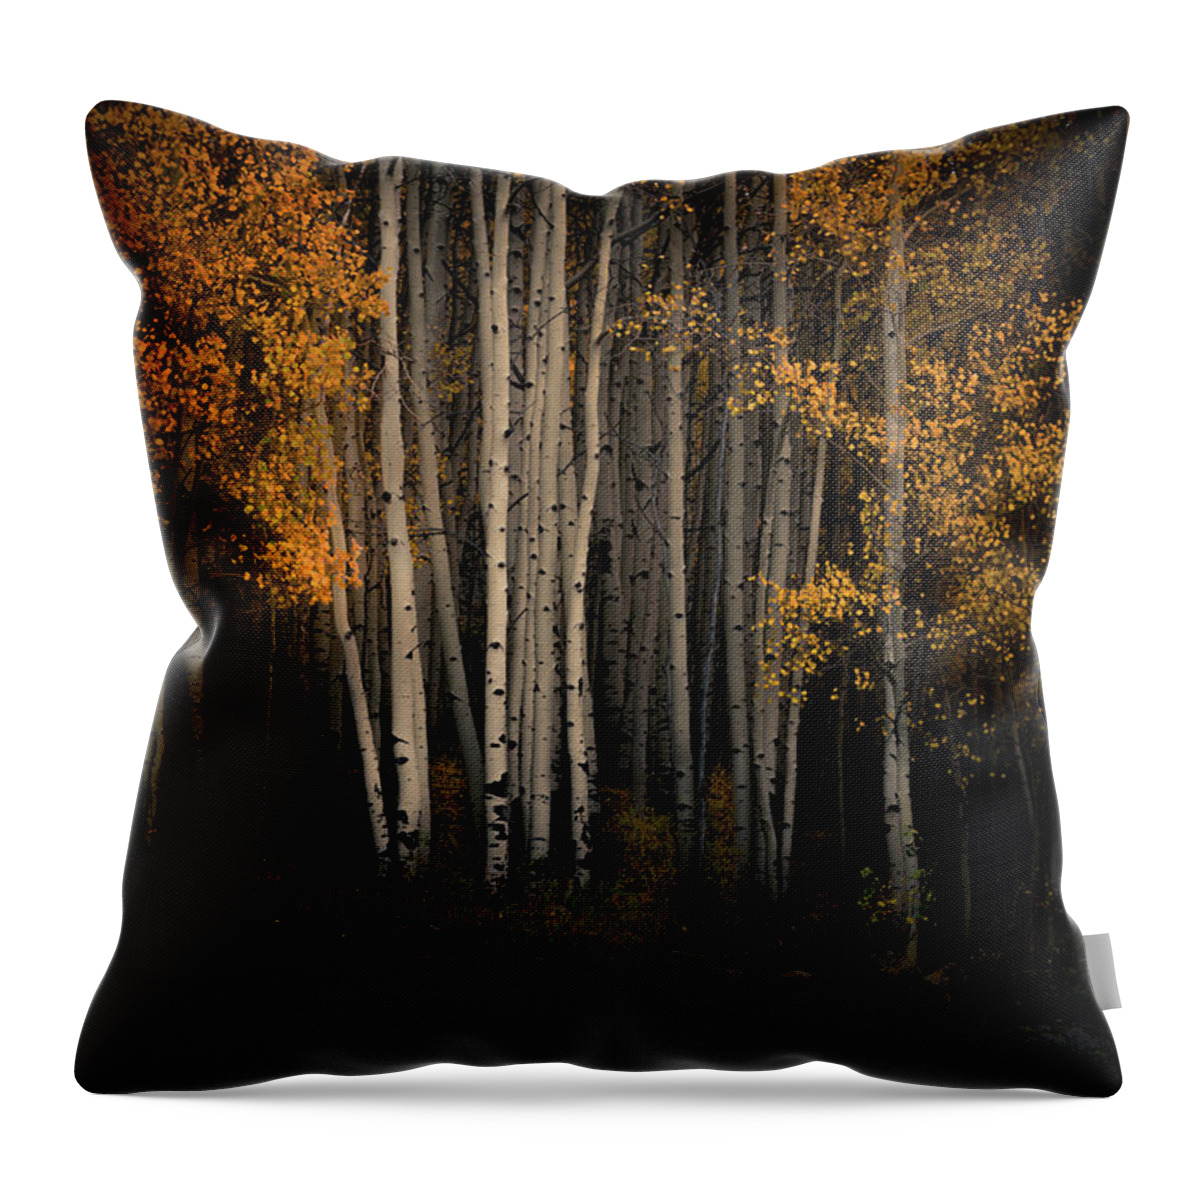 Aspen Trees Throw Pillow featuring the photograph Spotlight by The Forests Edge Photography - Diane Sandoval